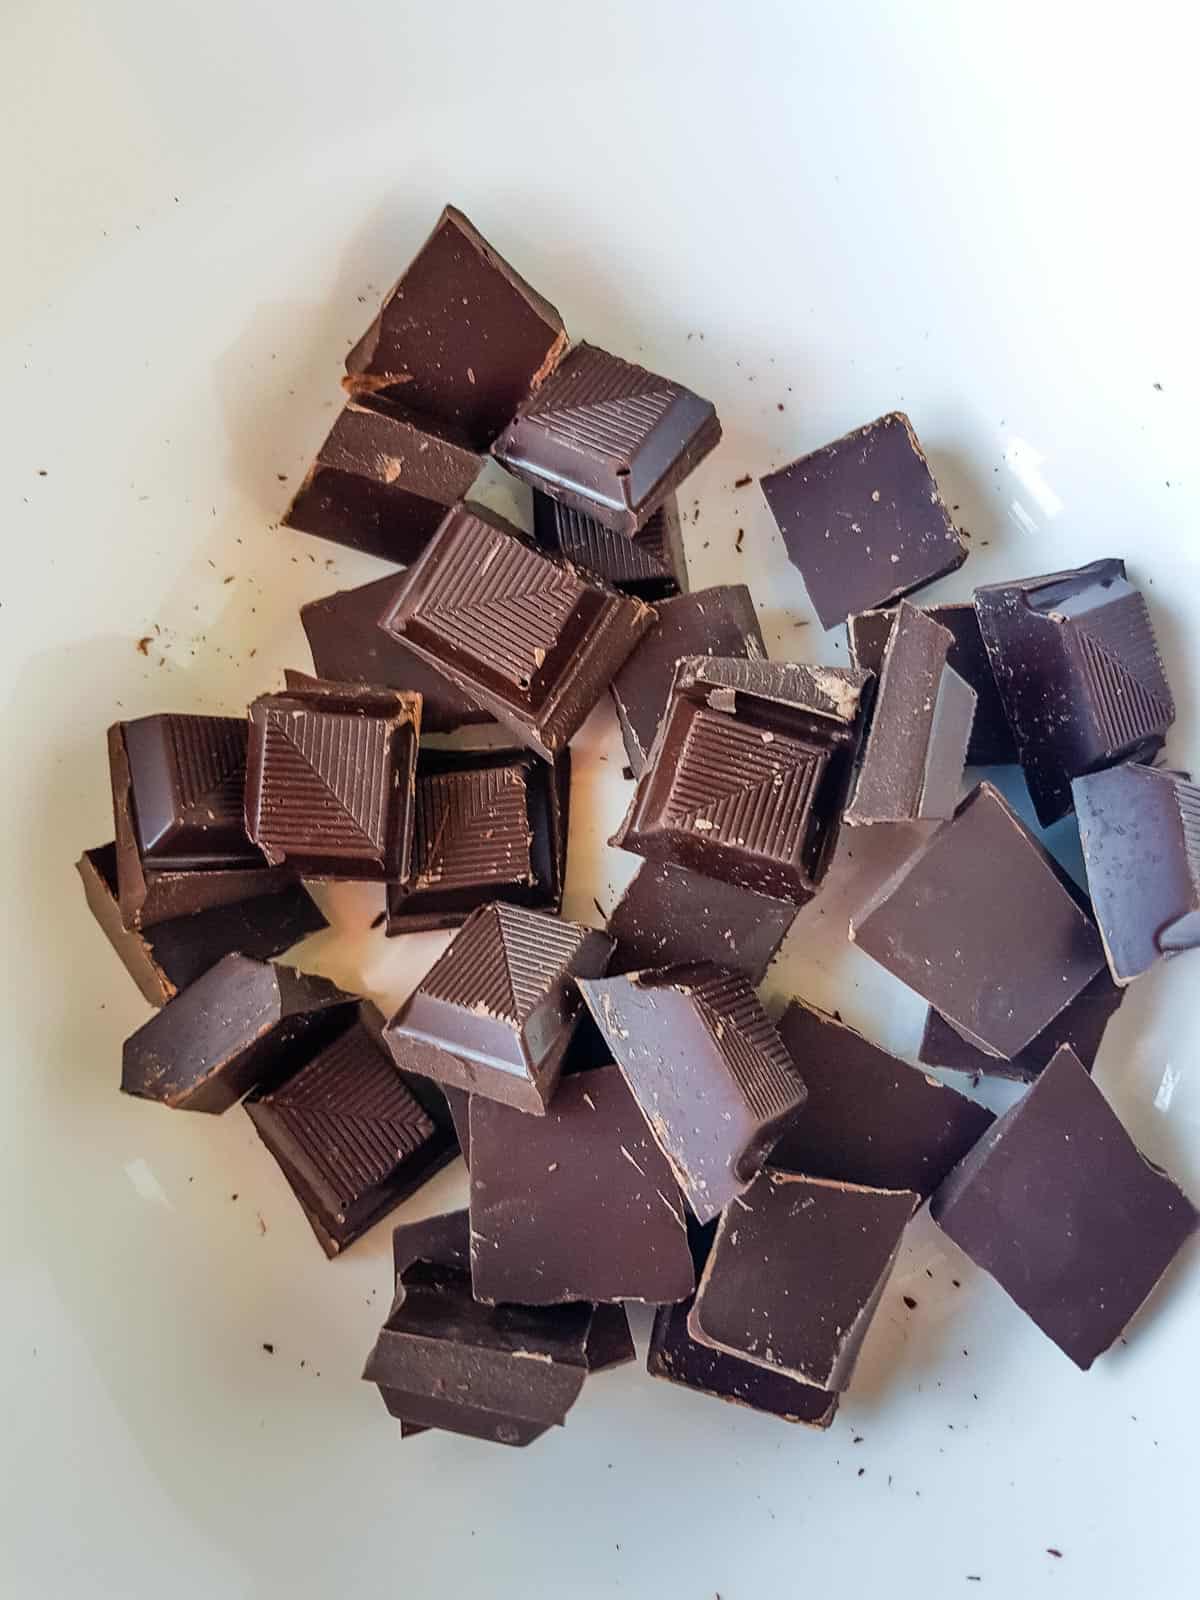 Dark chocolate squares in a bowl.